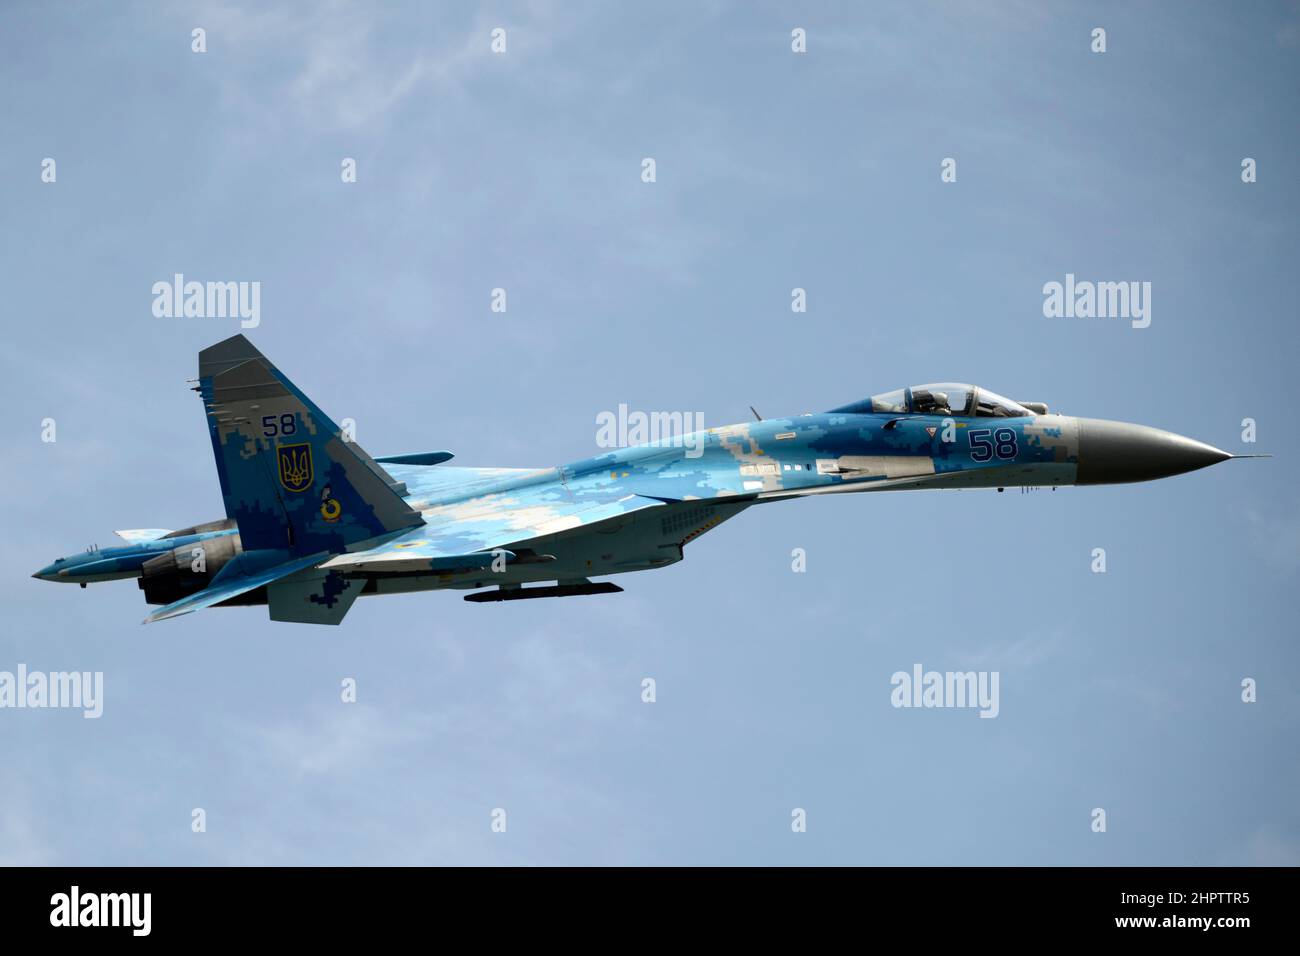 Hradec Kralove, Czech Republic. 2nd Sep, 2017. The Armed Forces of Ukraine at a flight demonstration in the Czech Republic. The best air asset of the Ukrainian Air Force is the legendary Sukhoi Su-27. NATO-reporting name Flanker. (Credit Image: © Slavek Ruta/ZUMA Press Wire) Stock Photo